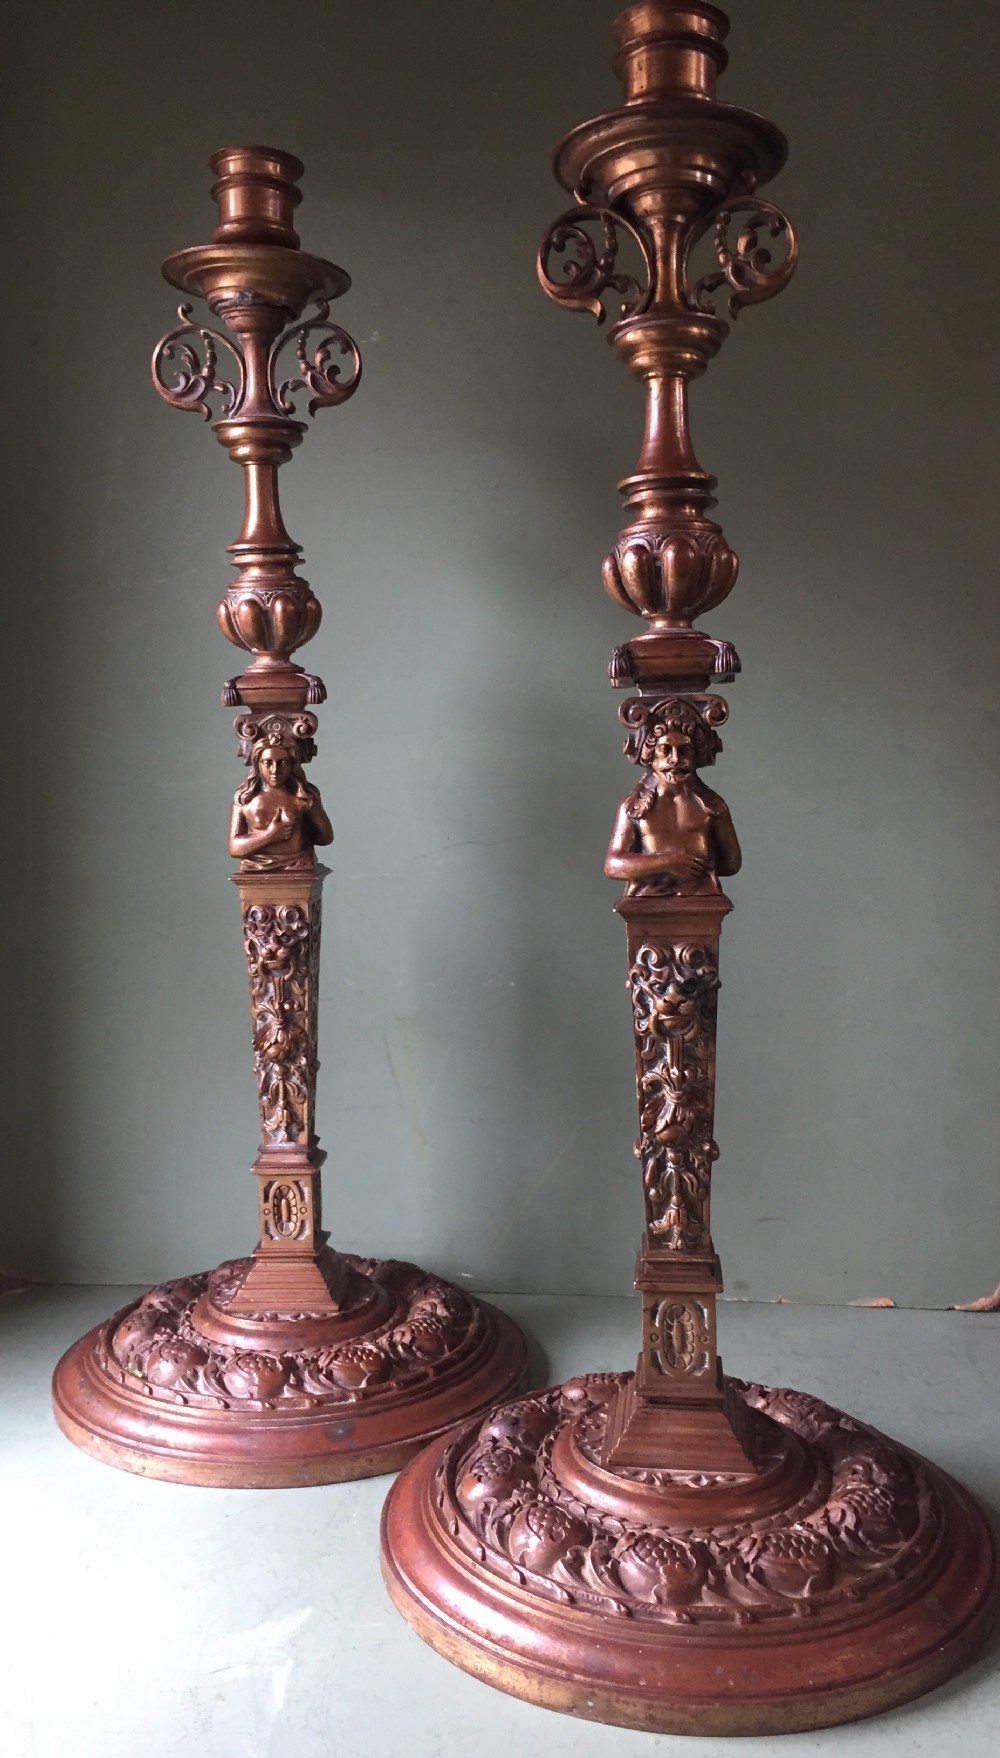 large pair of c19th cast bronze candlesticks in the mannerist late renaissance style